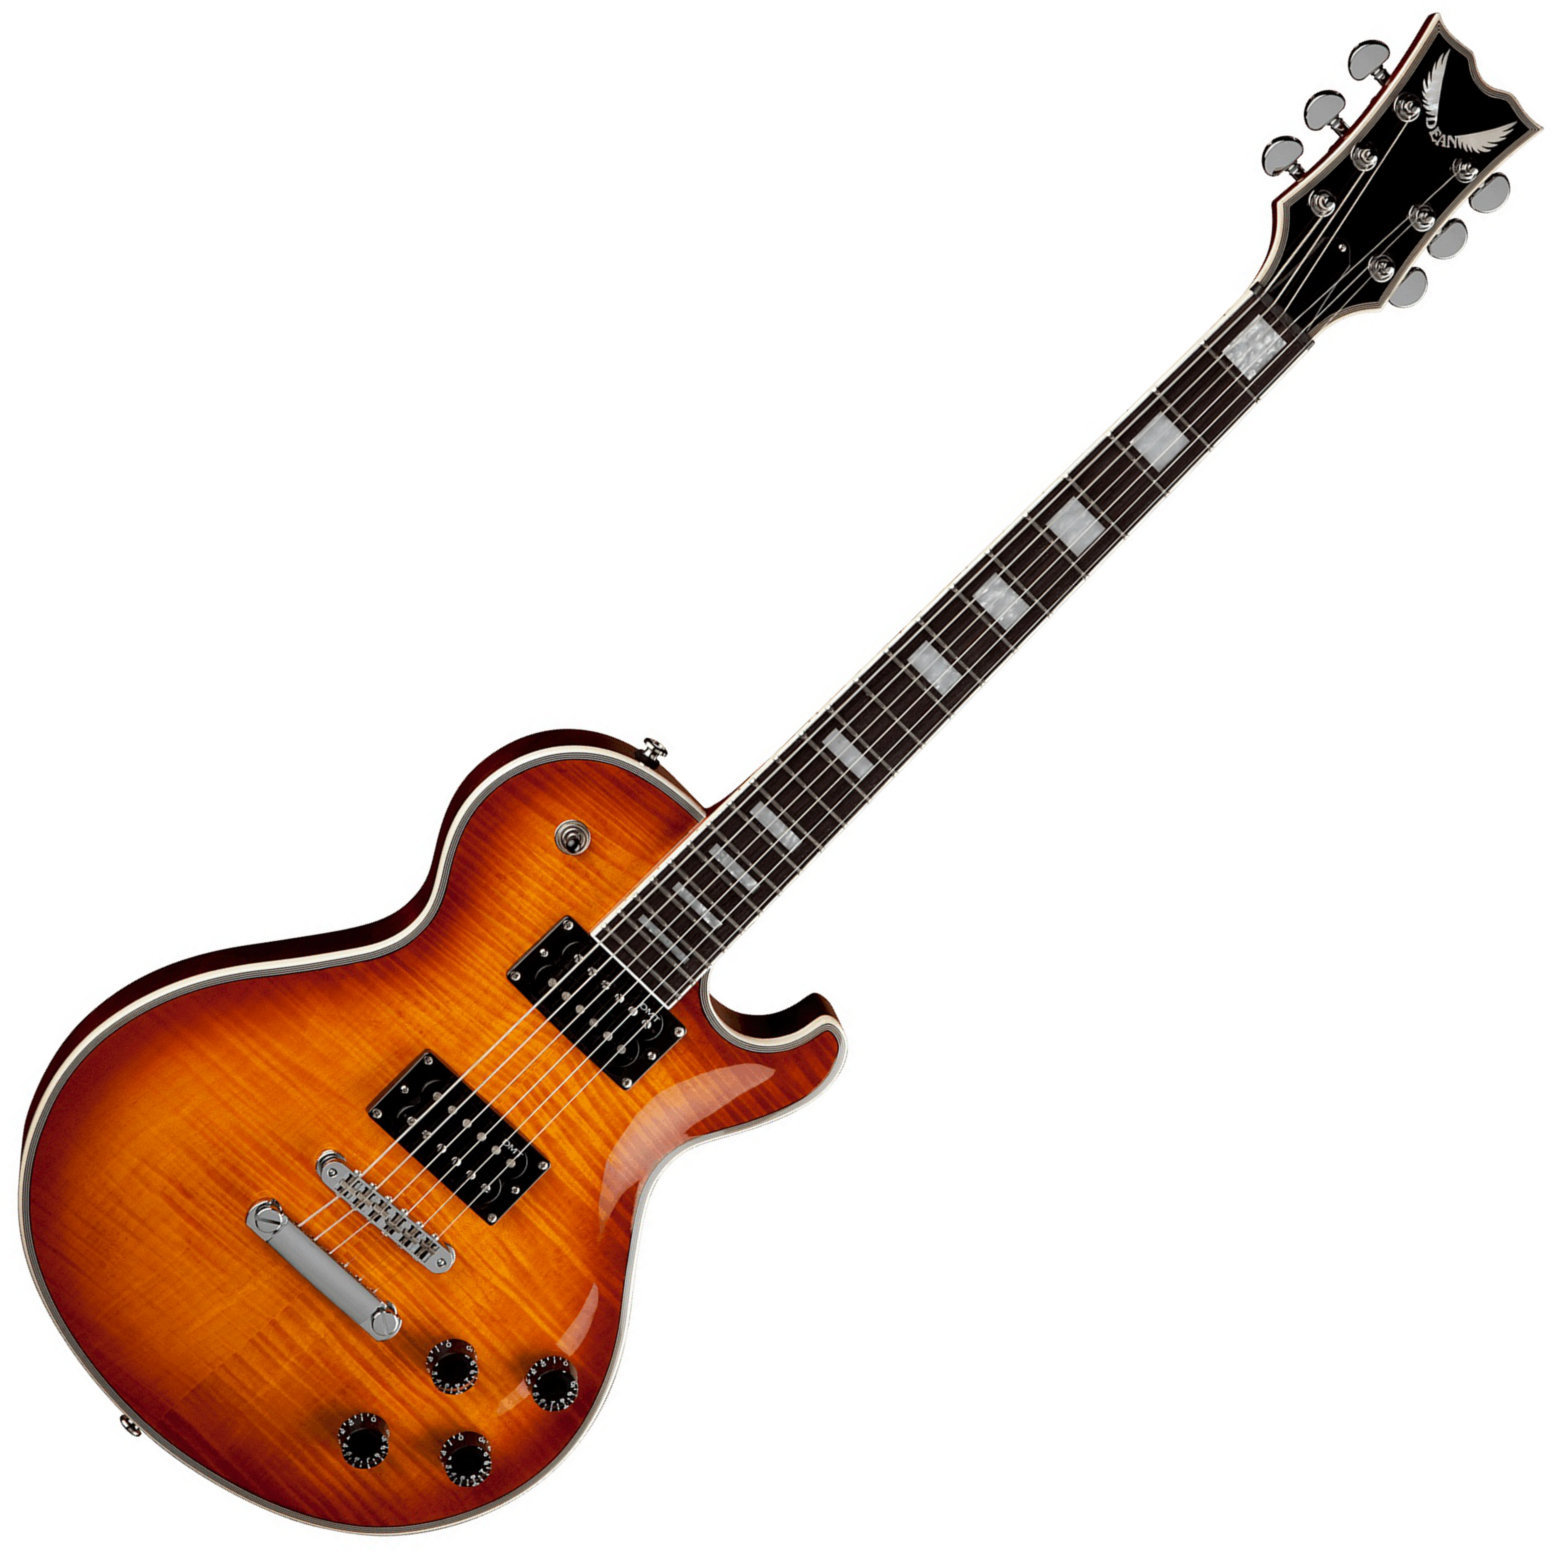 Electric guitar Dean Guitars Thoroughbred Deluxe - Trans Amber